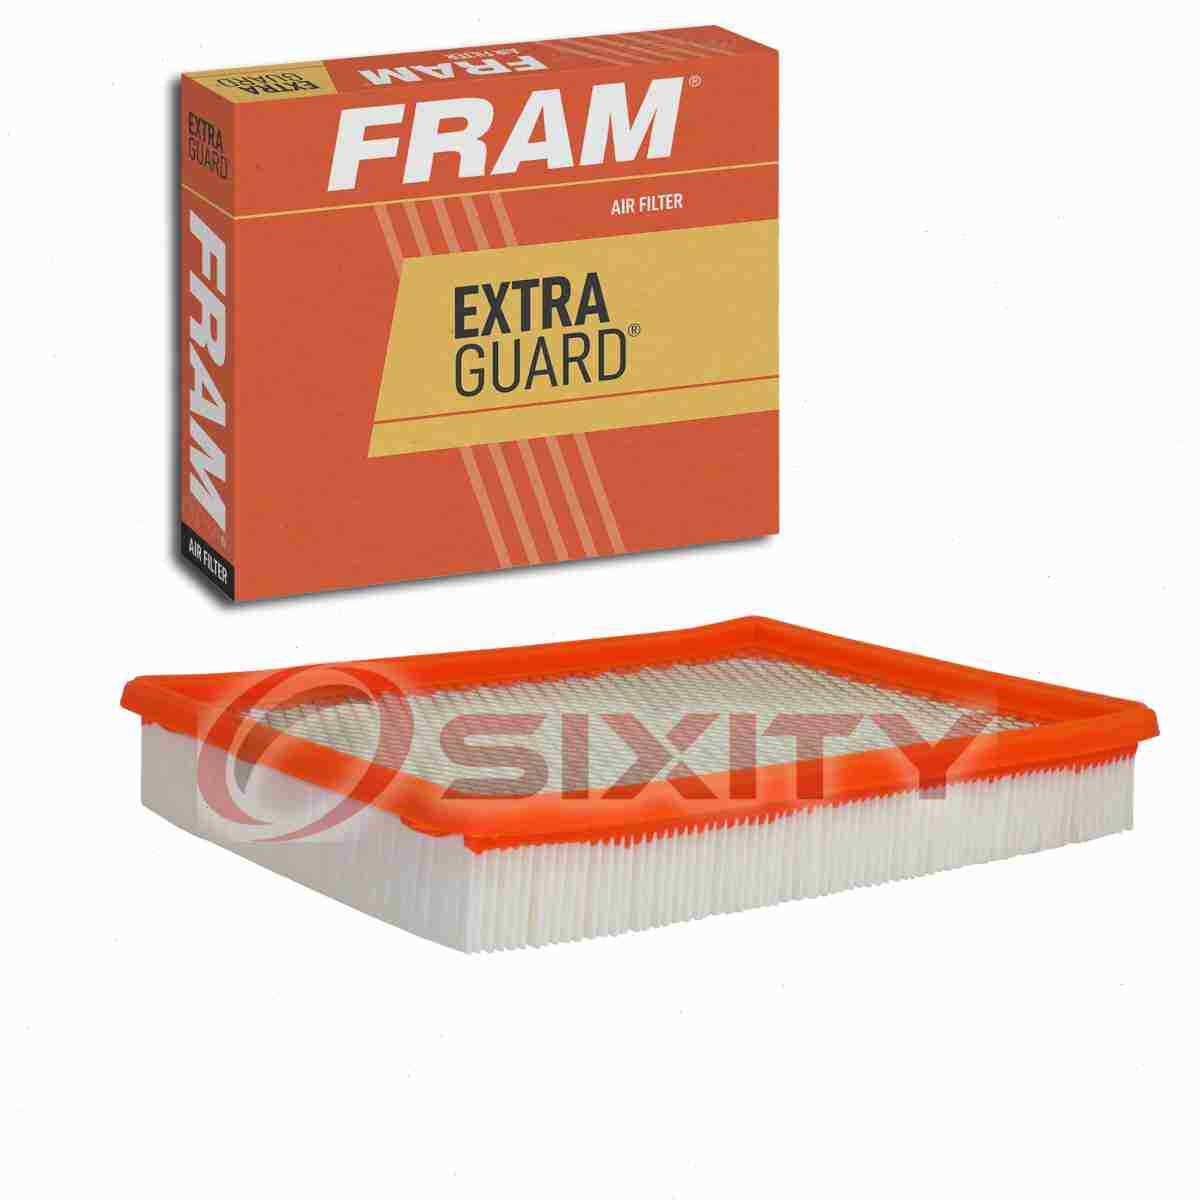 FRAM Extra Guard Air Filter for 1993 Cadillac Allante Intake Inlet Manifold jf